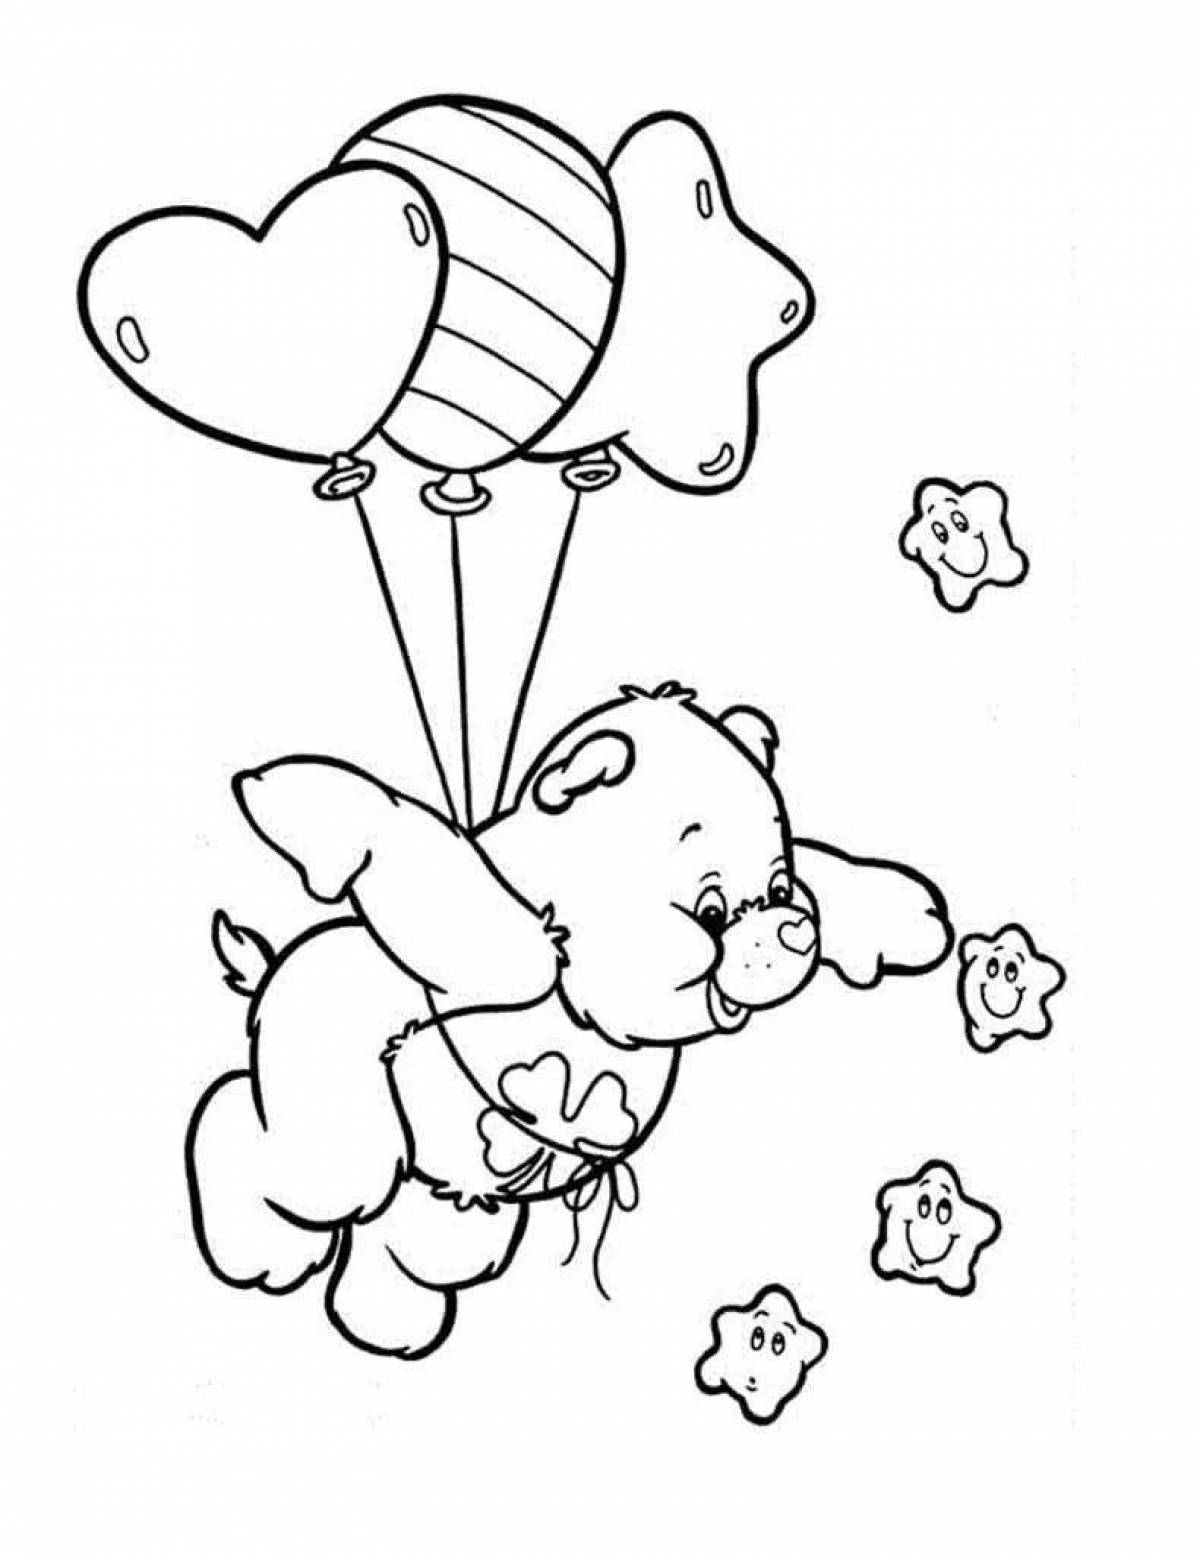 Radiant bear with balloons